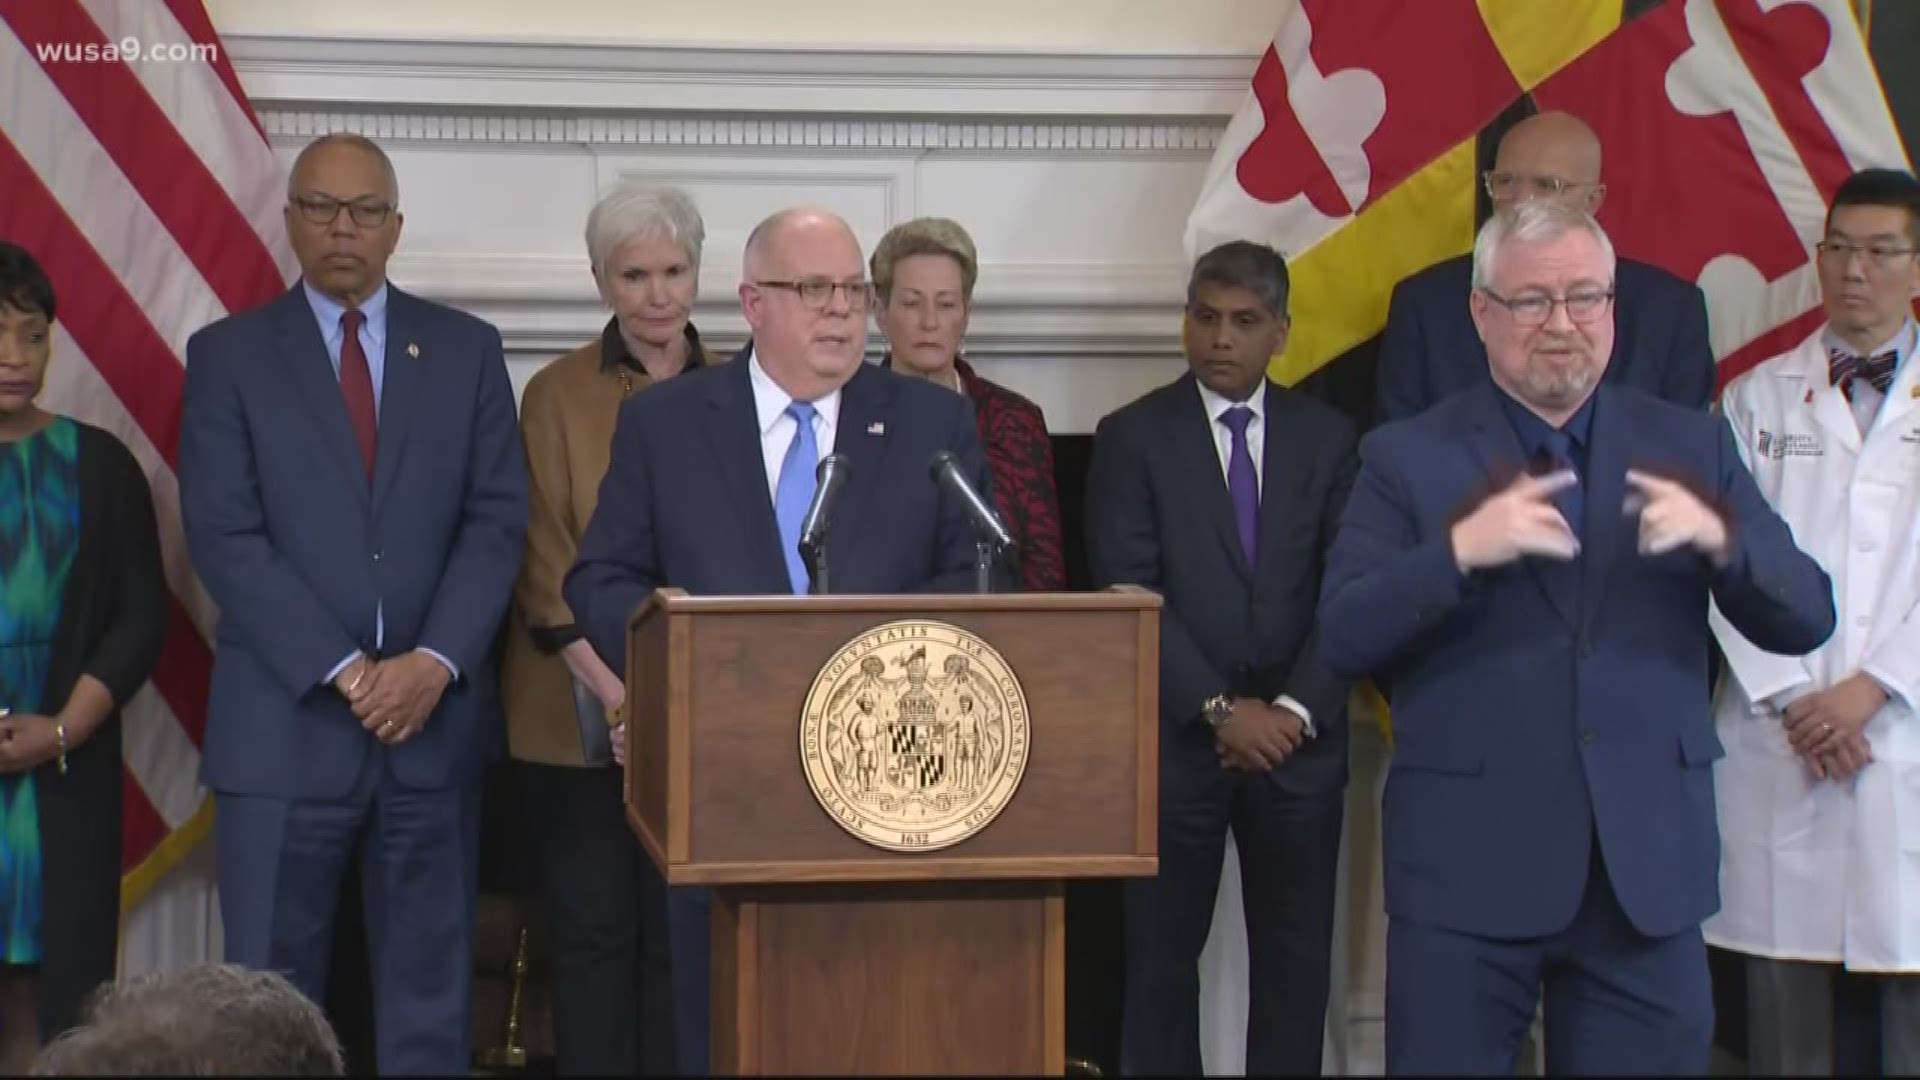 Governor Larry Hogan announced the decision Thursday afternoon, closing all schools from March 16 to March 27.